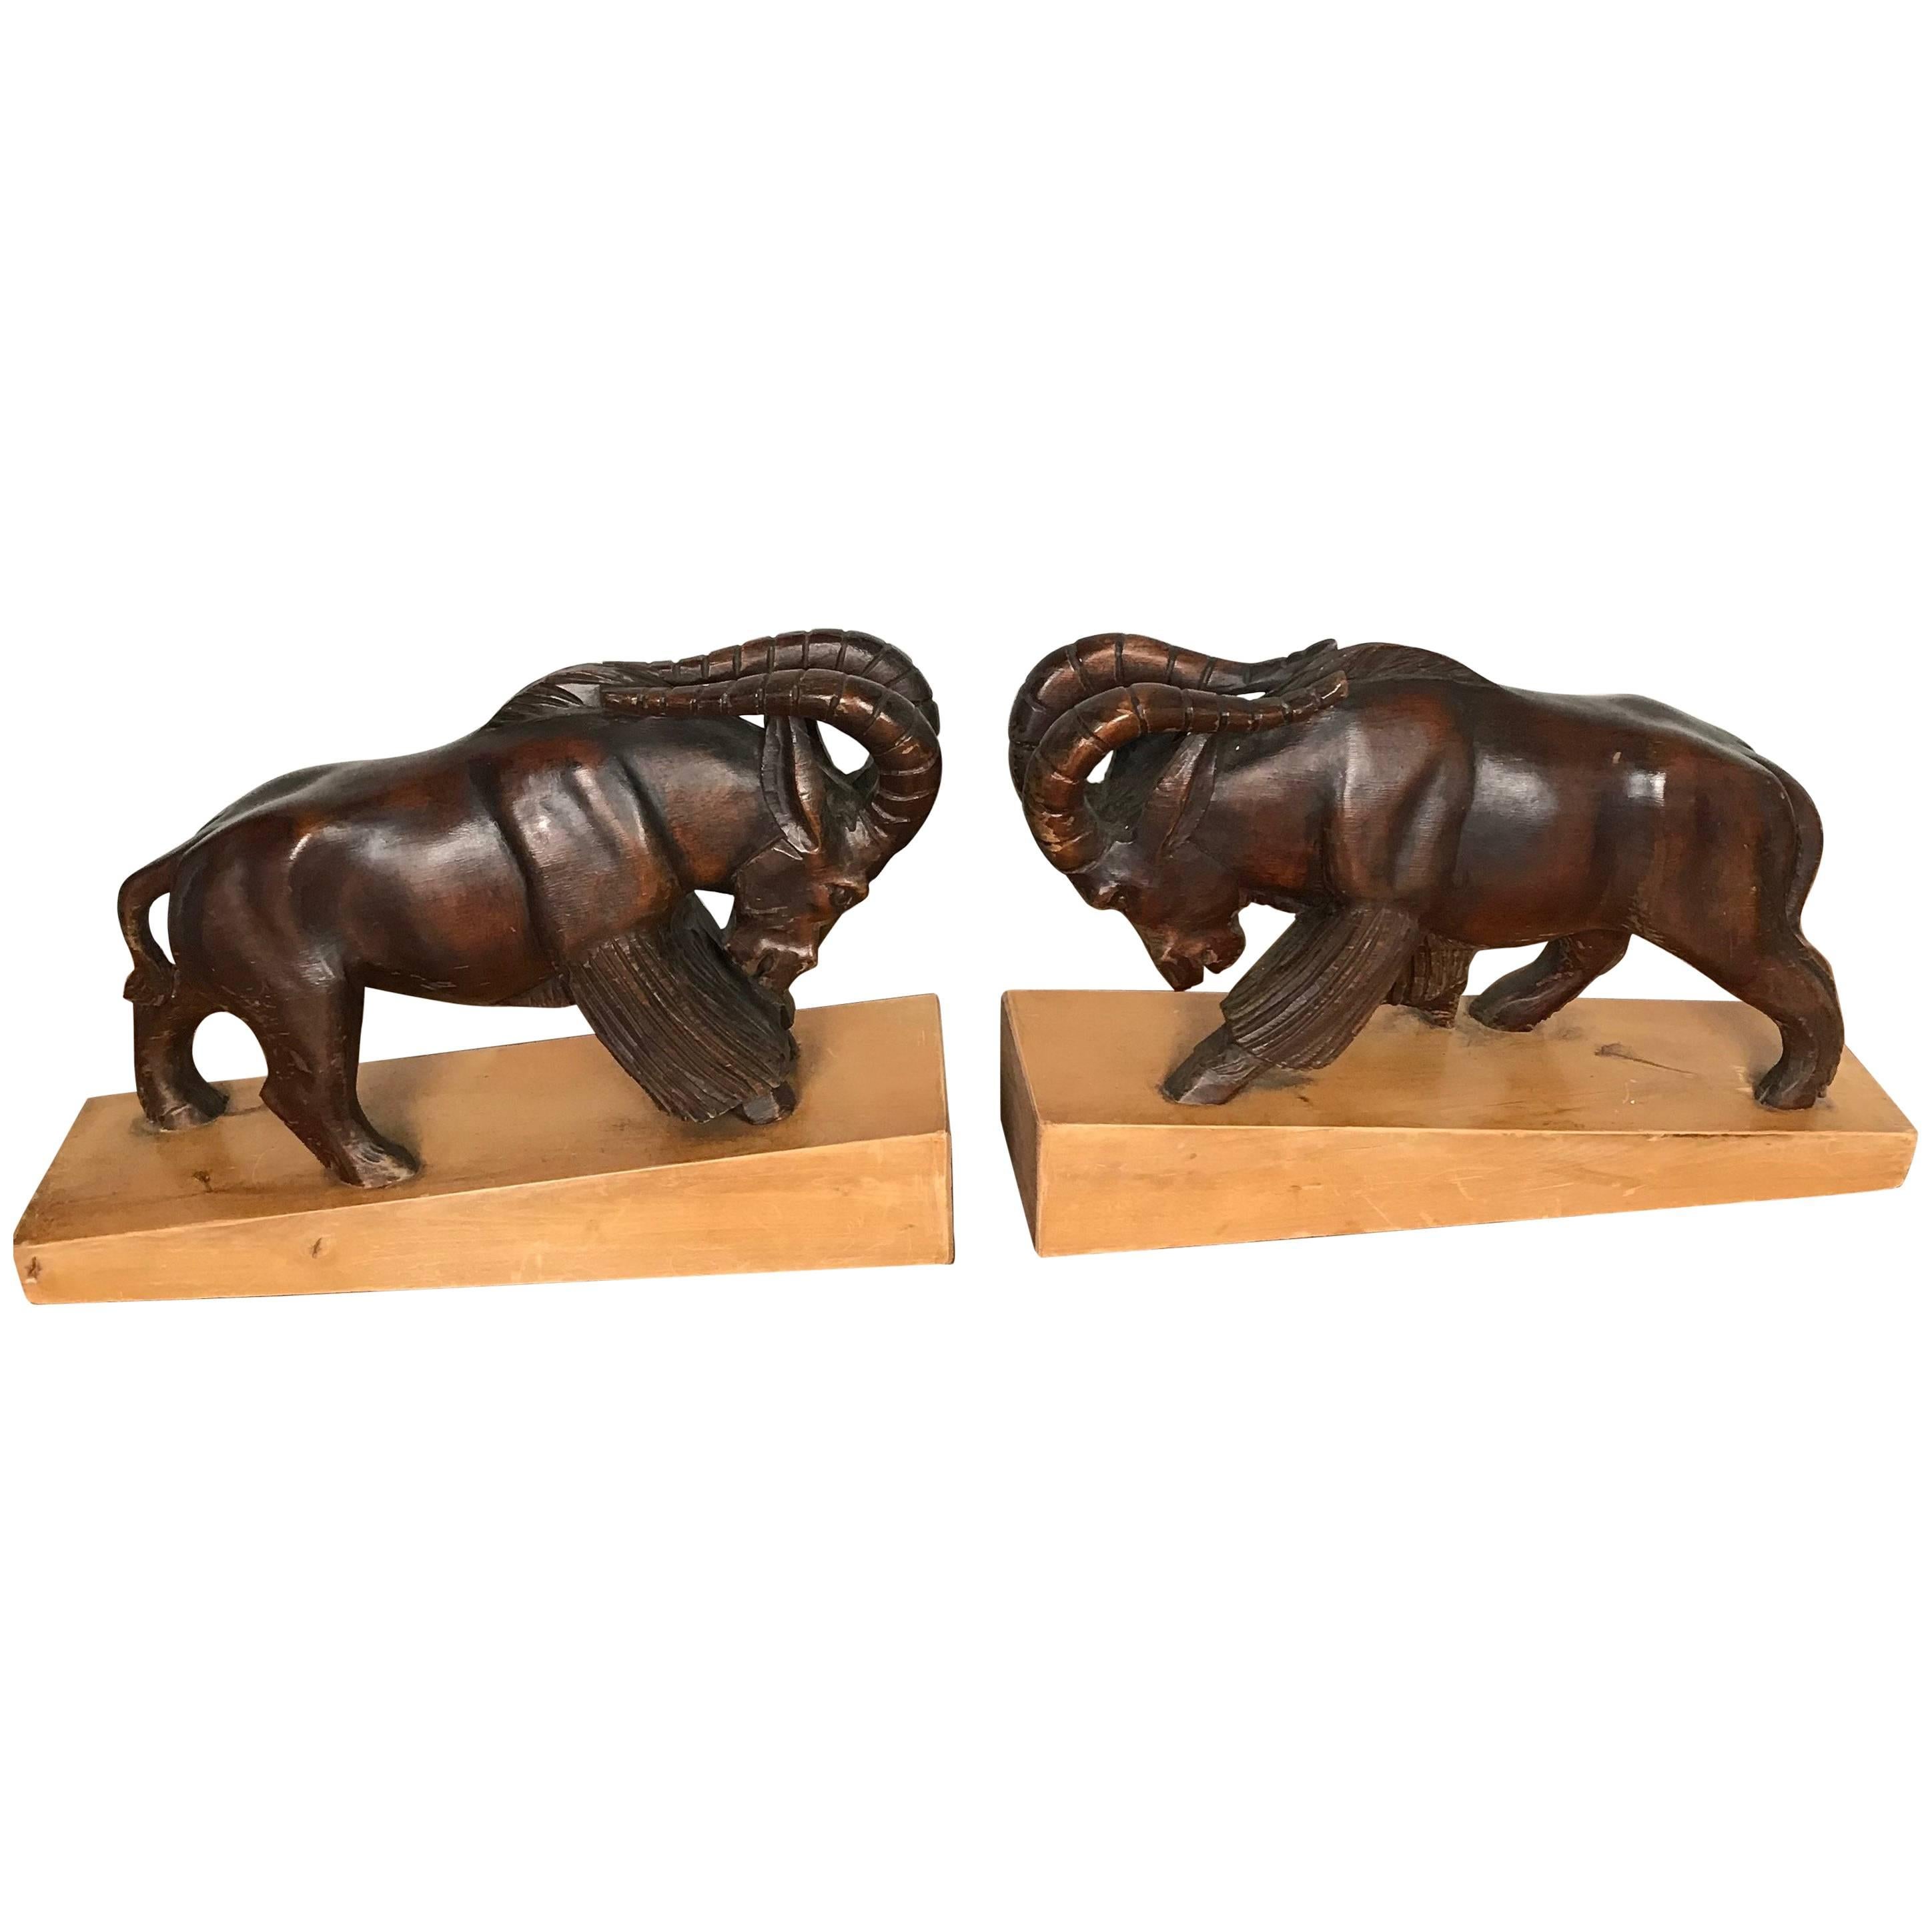 Large & Impressive Hand-Carved Wooden Pair of Fighting Ram Sculpture Bookends For Sale